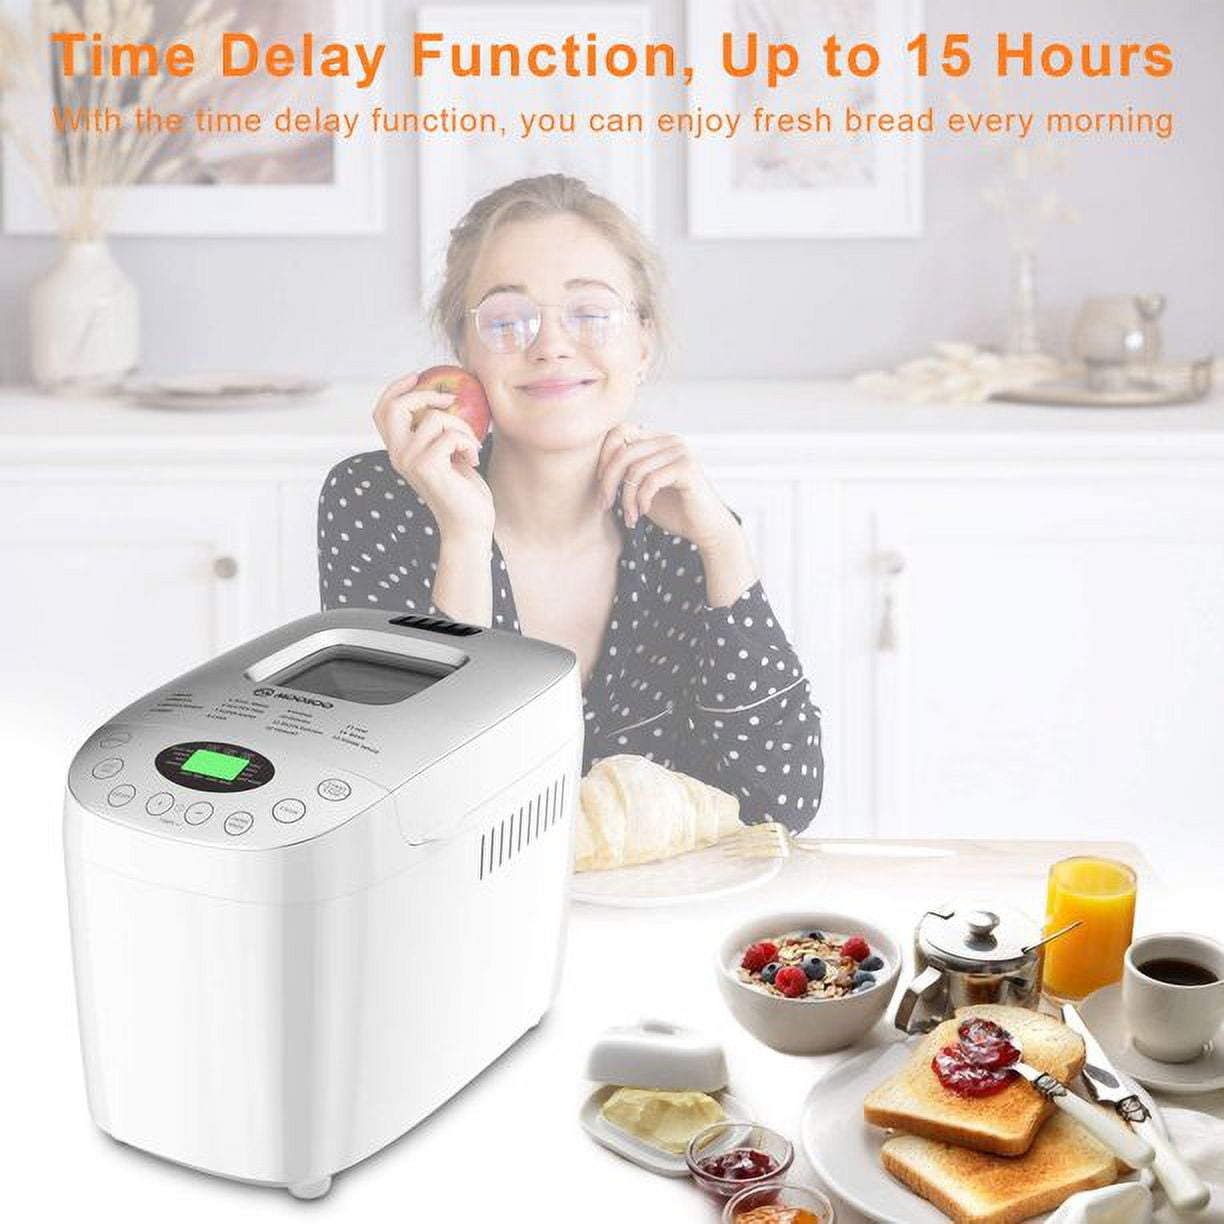 Involly BM8216-D 15 in 1 Fully Automatic Bread Maker